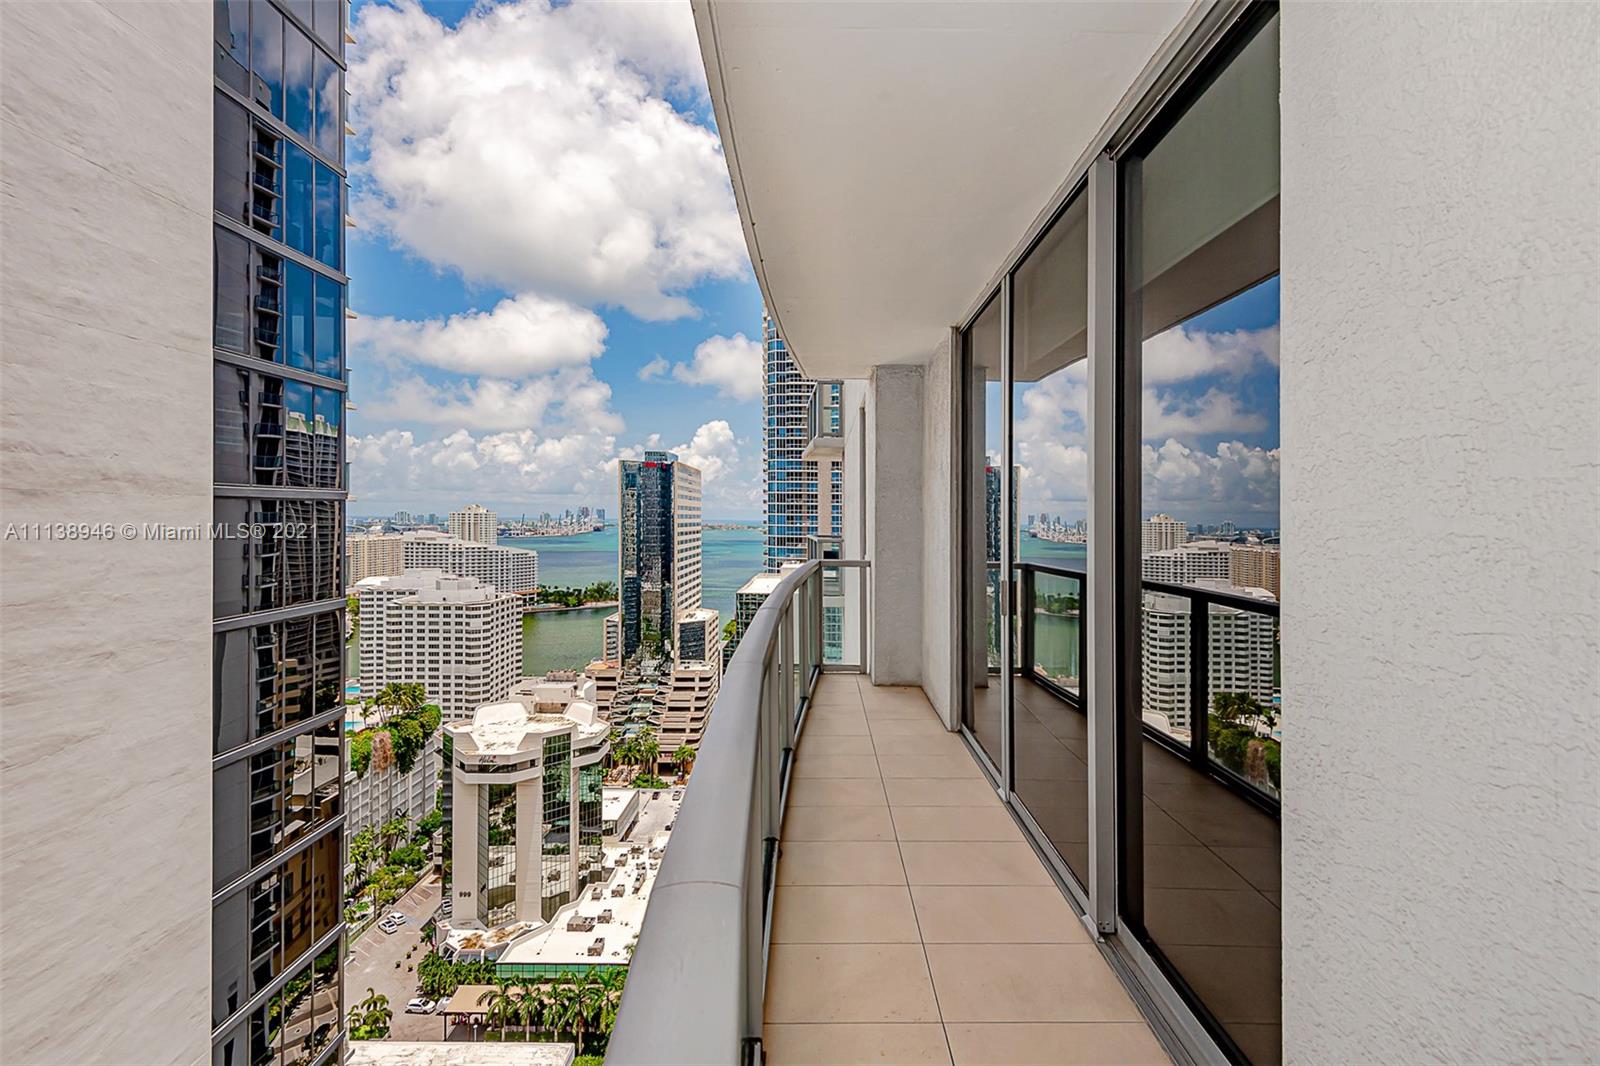 Awesome studio in 1050 Brickell Building. Great view of the Brickell area with modern finishes and appliances.
High-end closet build-out. Large bathroom with marble shower stall. Tile flooring throughout and wood cabinetry in
kitchen & bathroom. Washer & Dryer in the apartment Basic cable included (provided by HOA). Ready for
immediate occupancy.